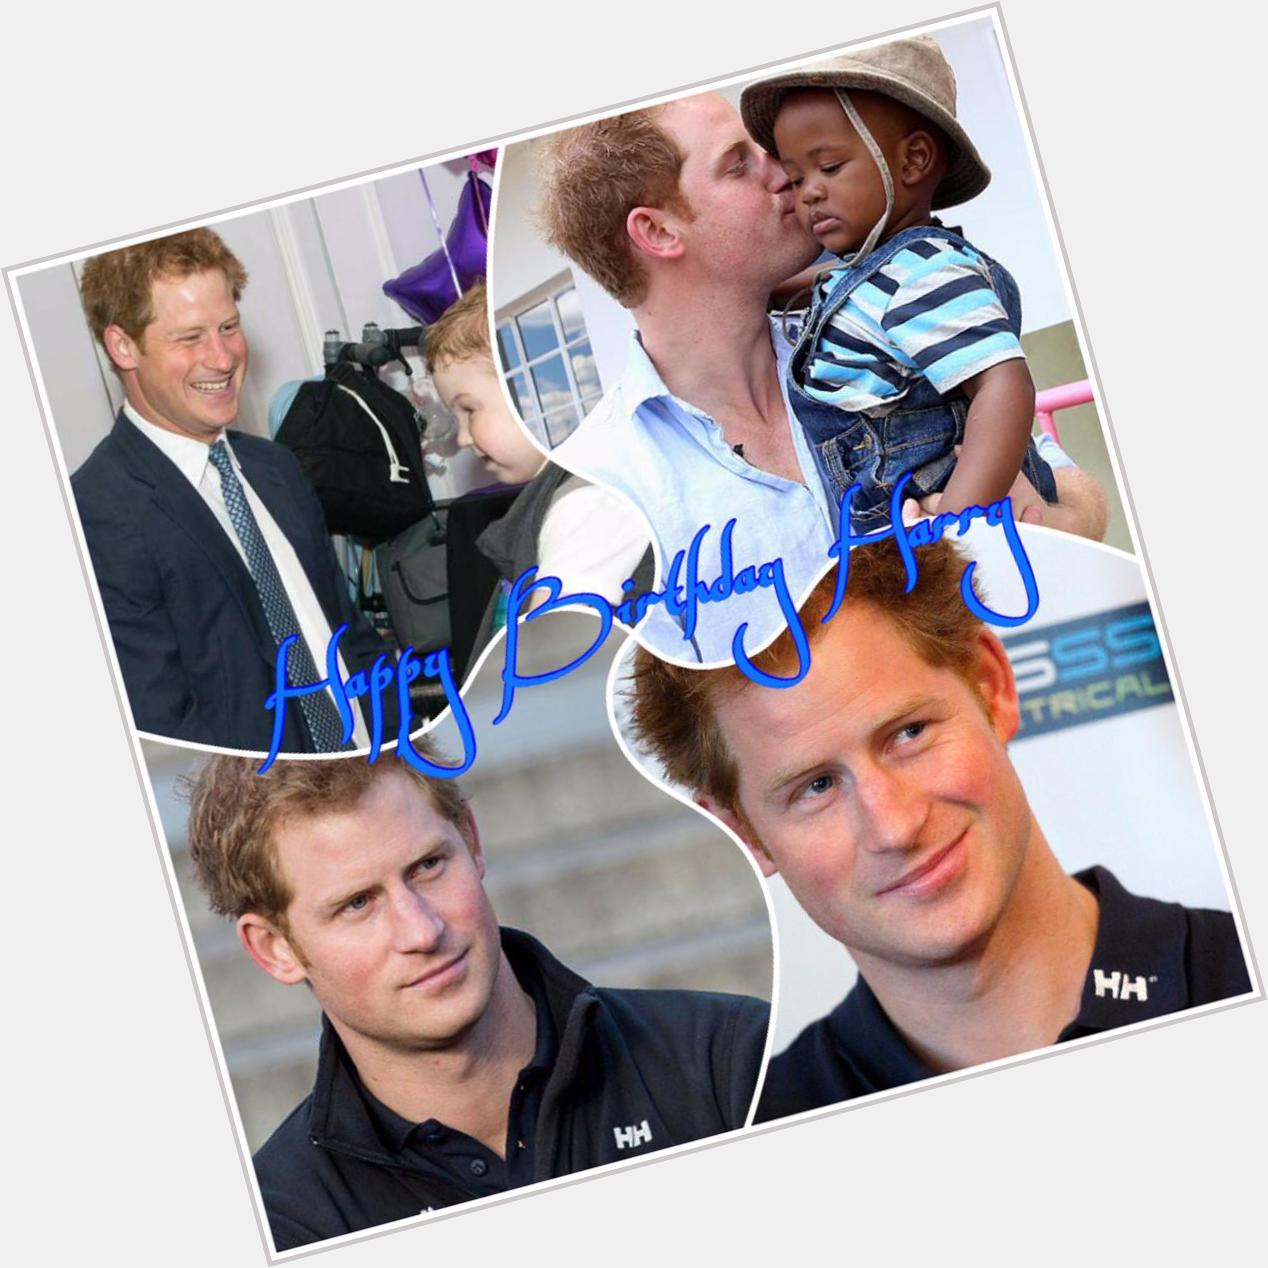 Happy Birthday to my favorite prince in the whole world, Prince Harry of Wales. May you have an amazing birthday    